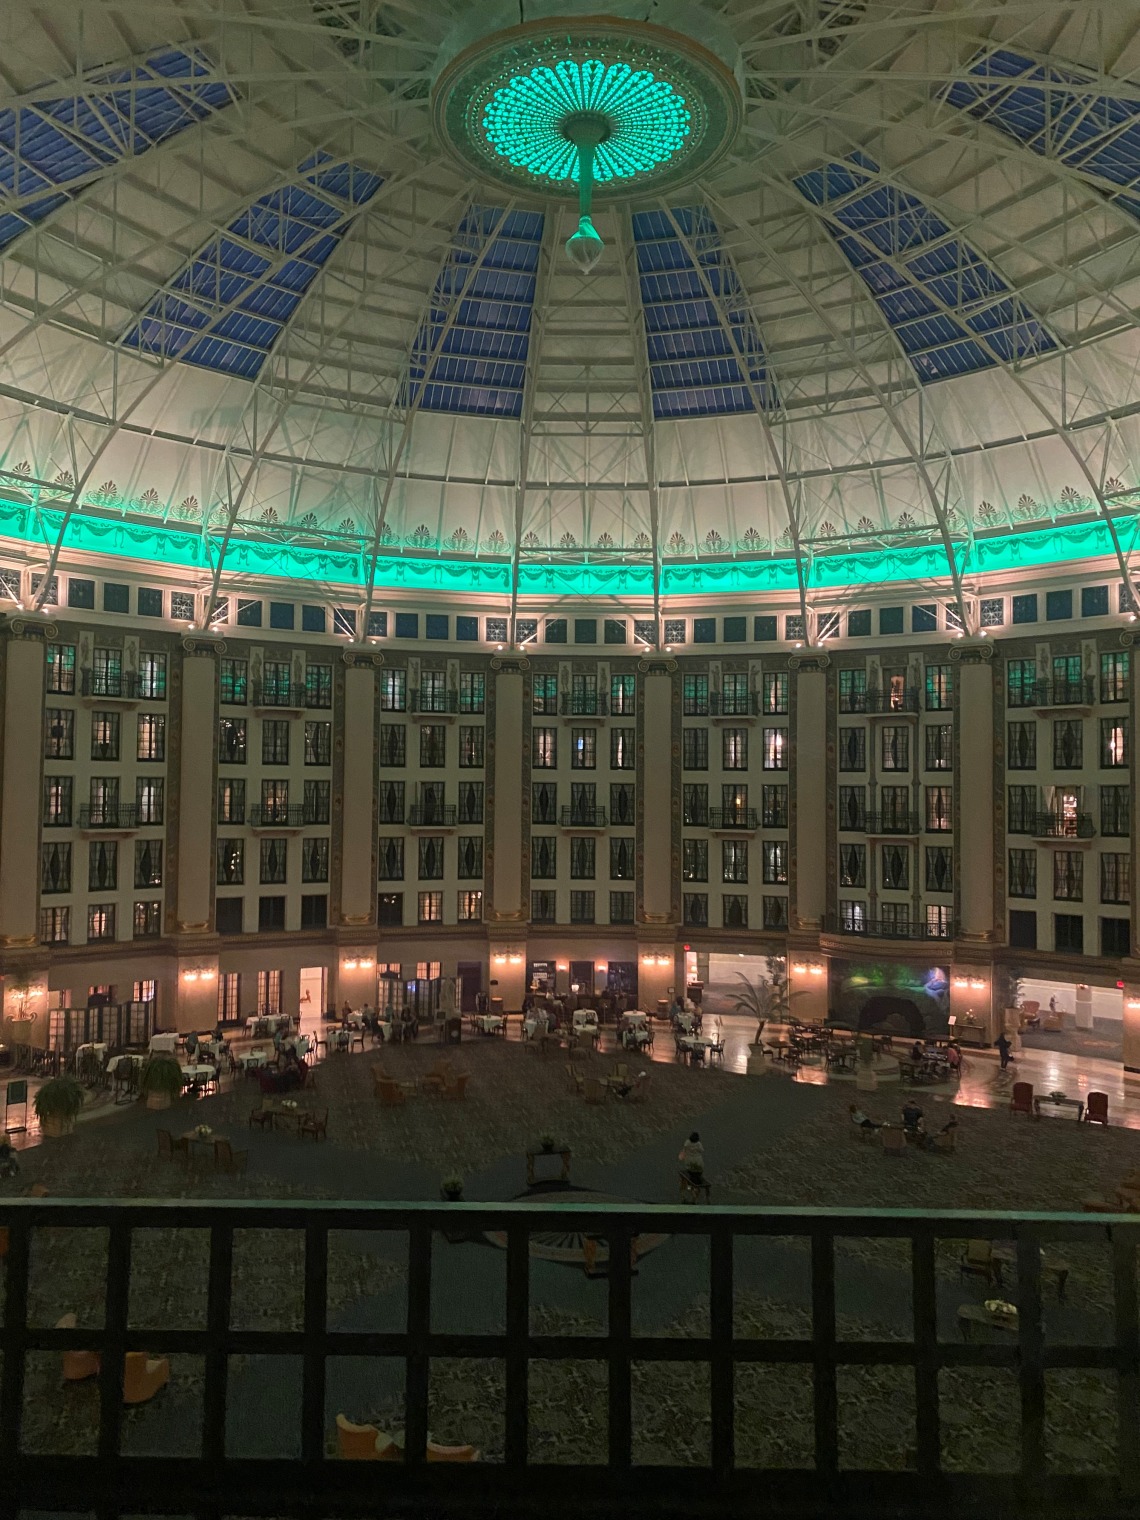 indoor view of the category 3, 100 foot tall flight area of the West Baden Springs hotel